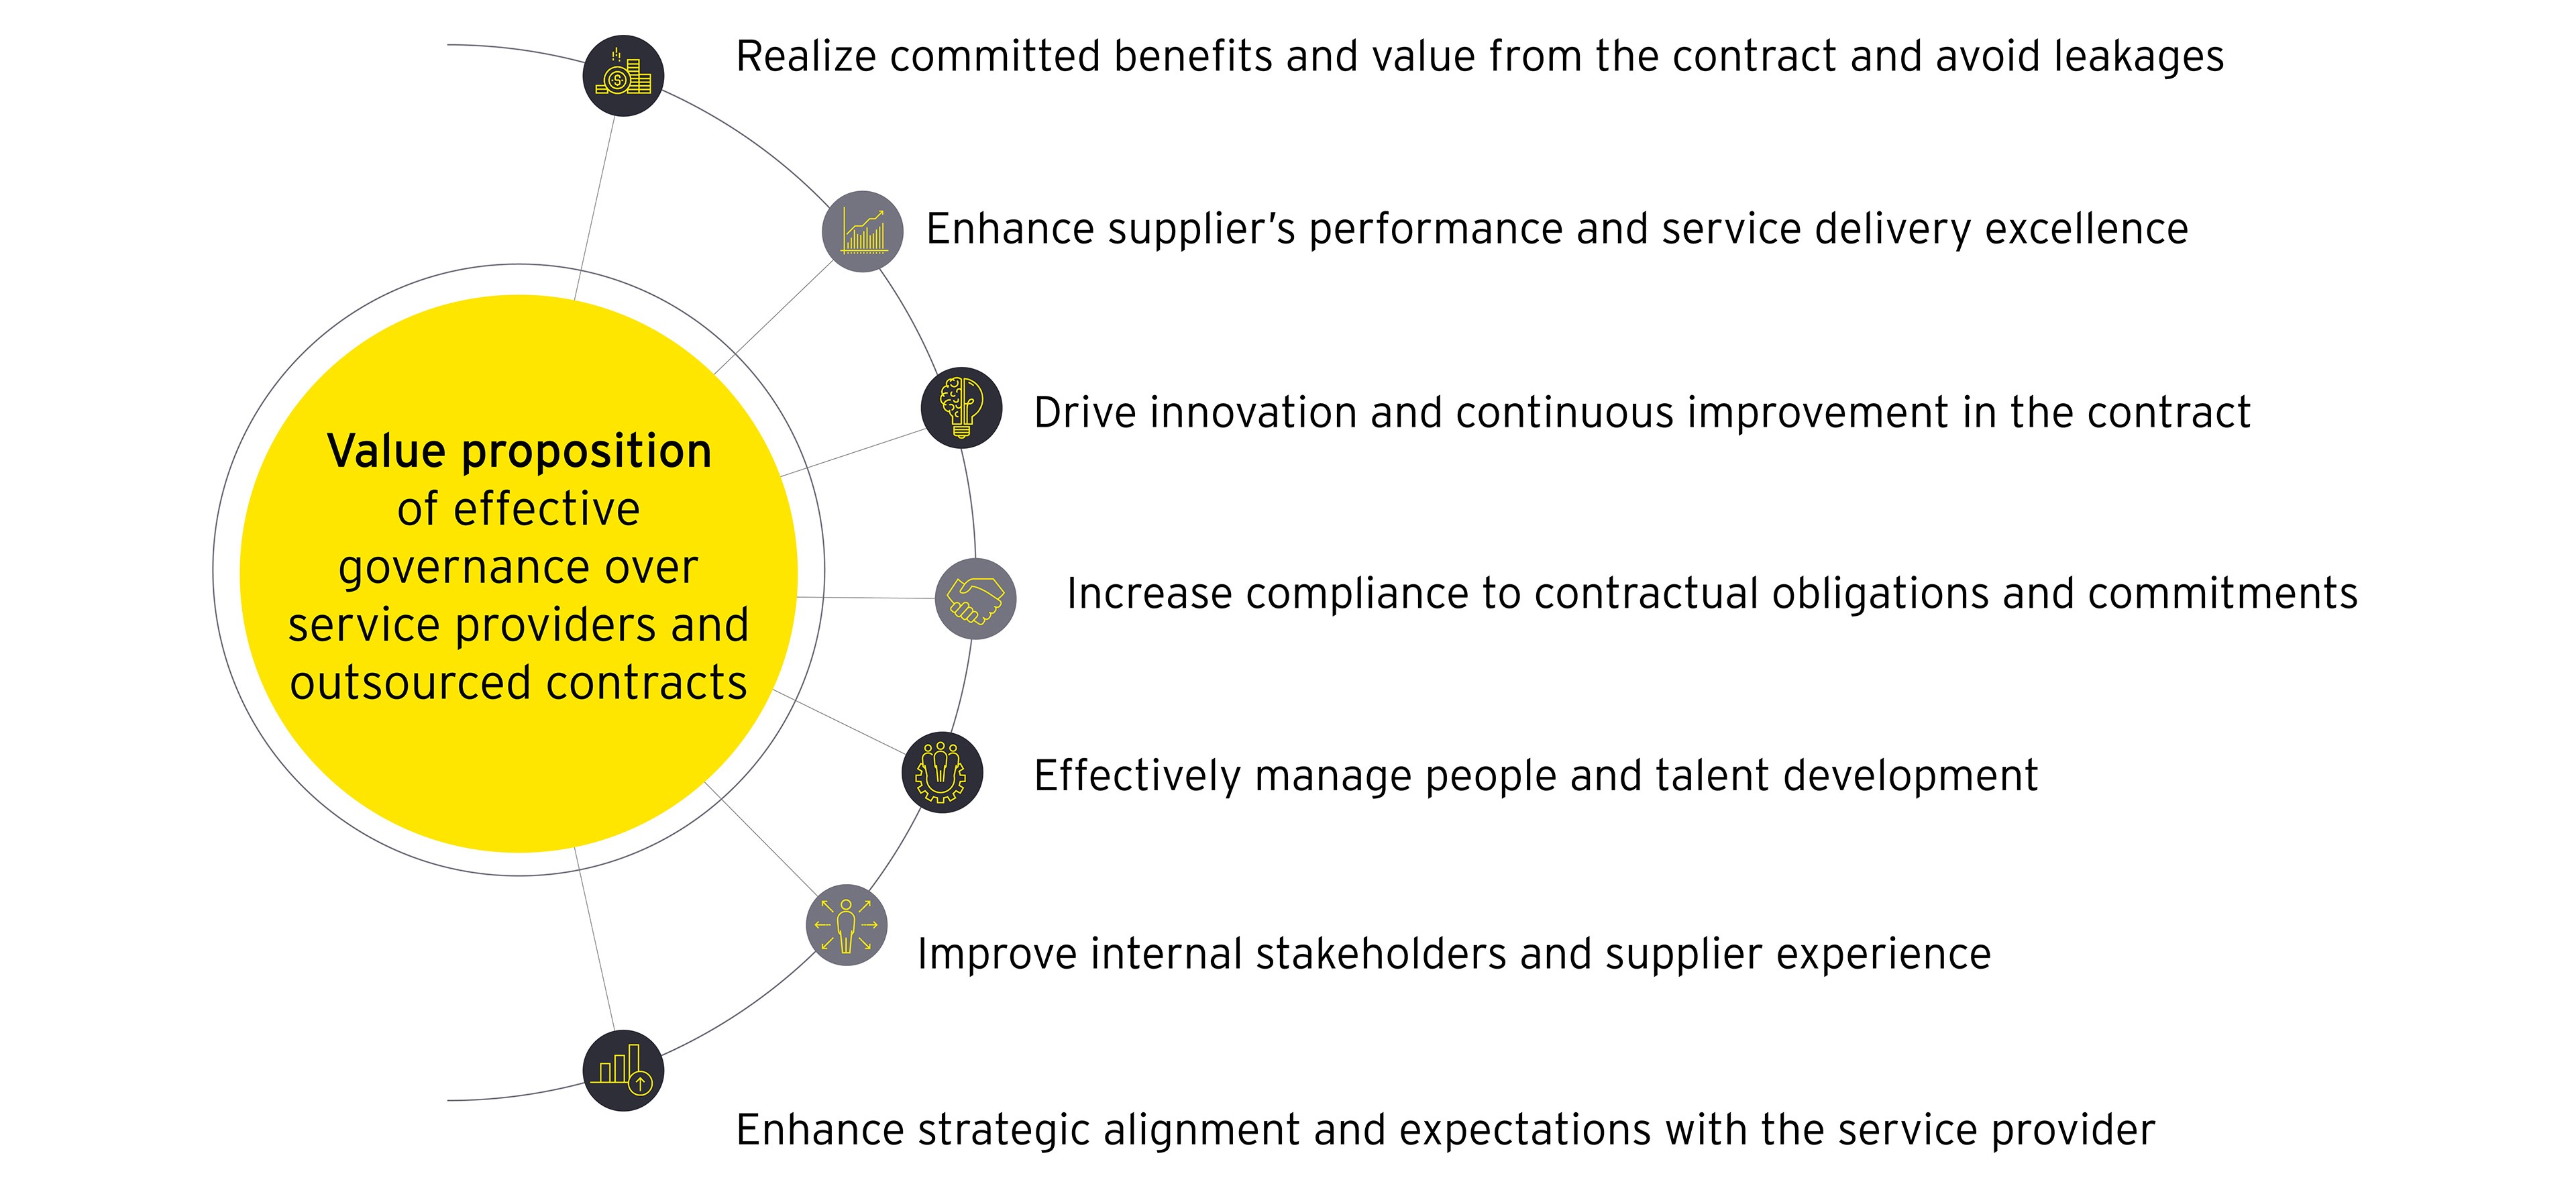 Value proposition of effective governance over service providers and outsourced contracts